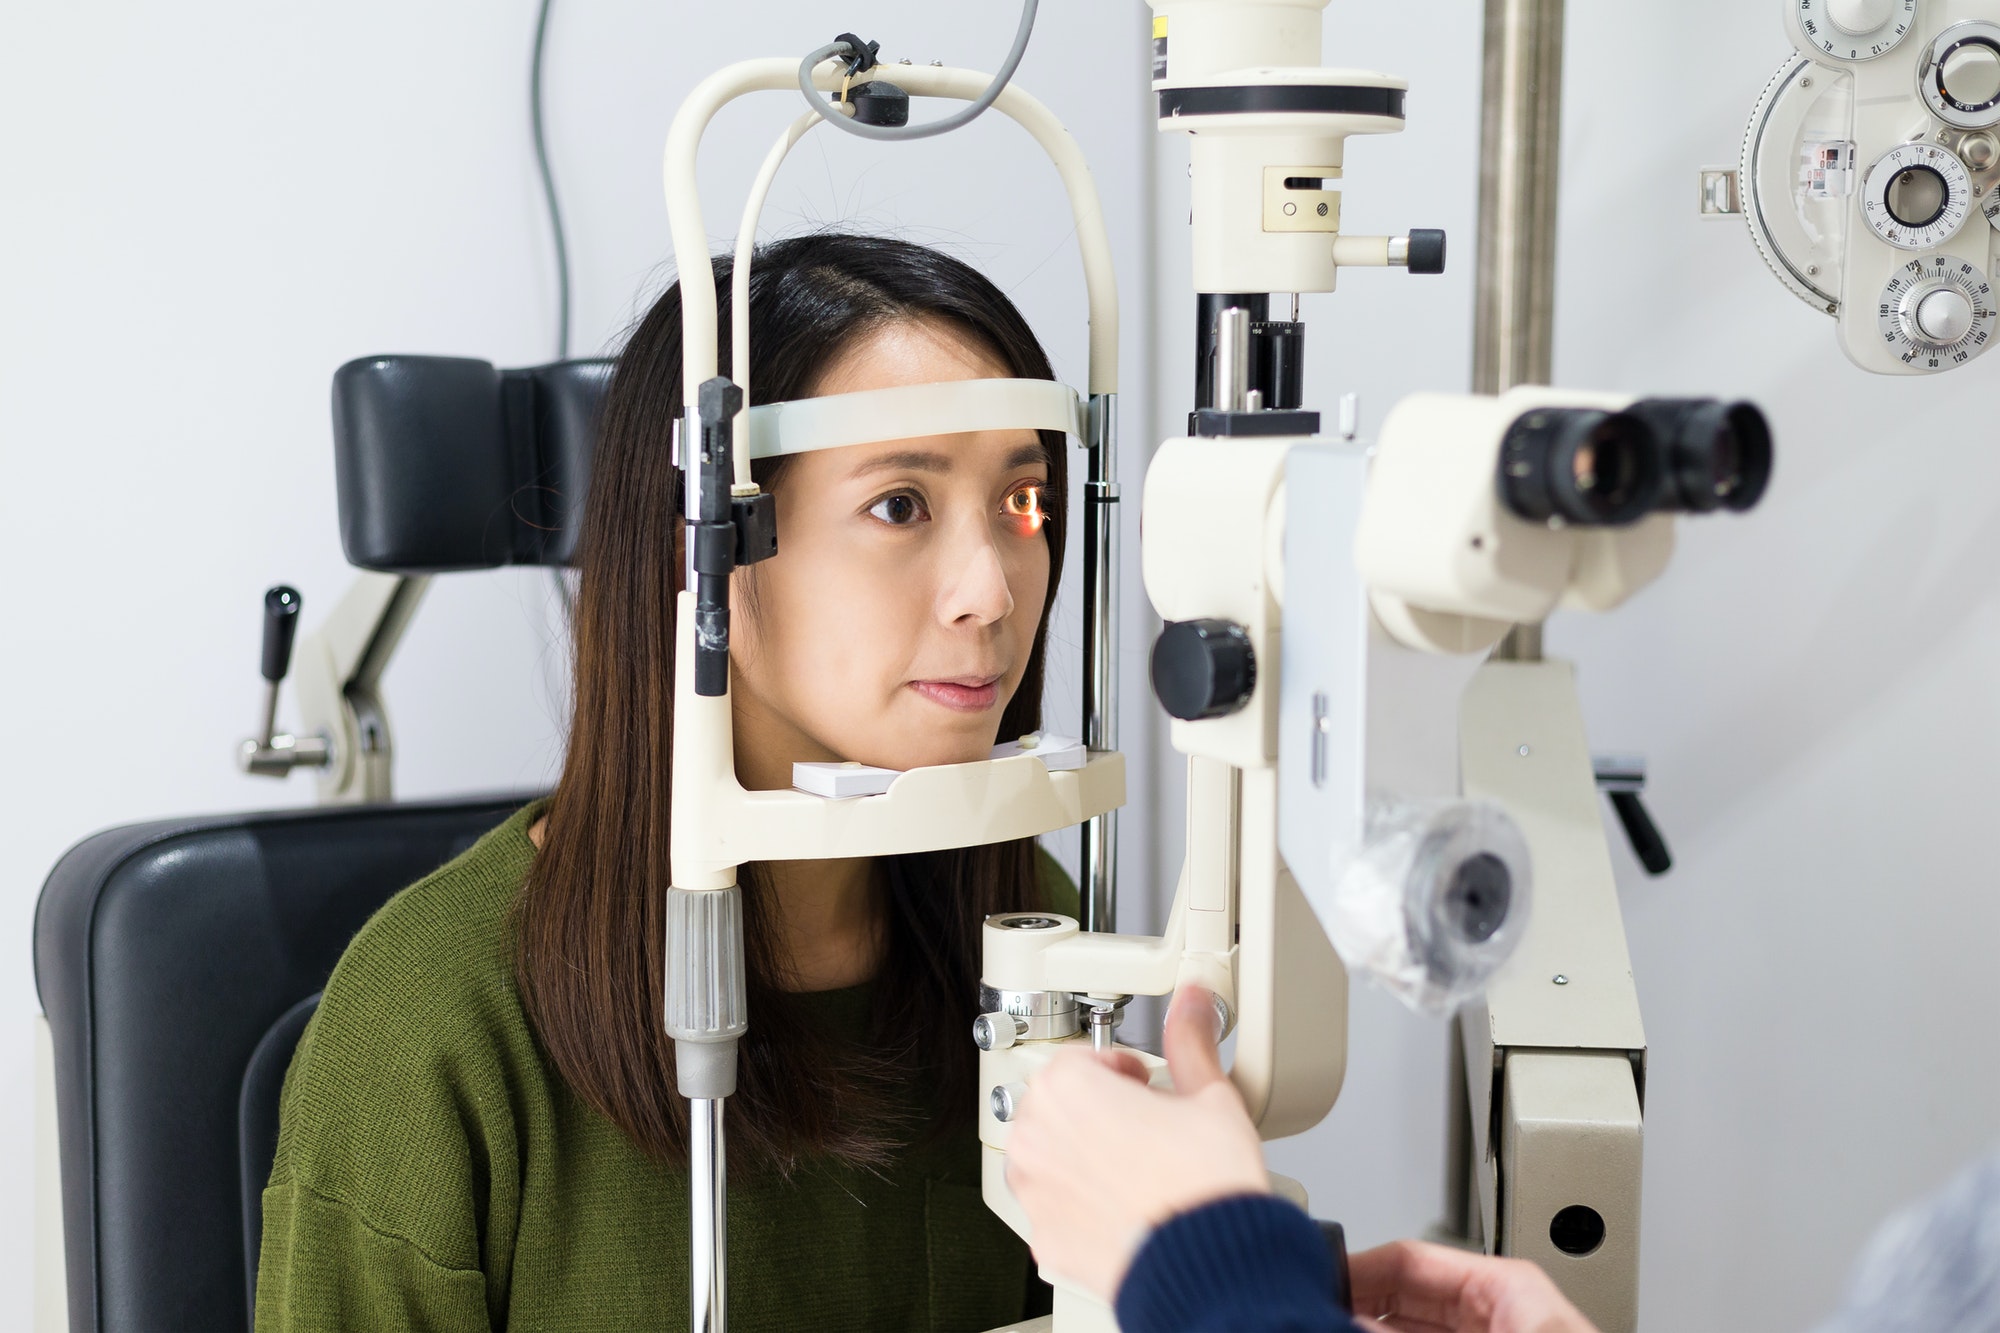 patient-during-an-eye-examination-at-the-eye-clinic.jpg